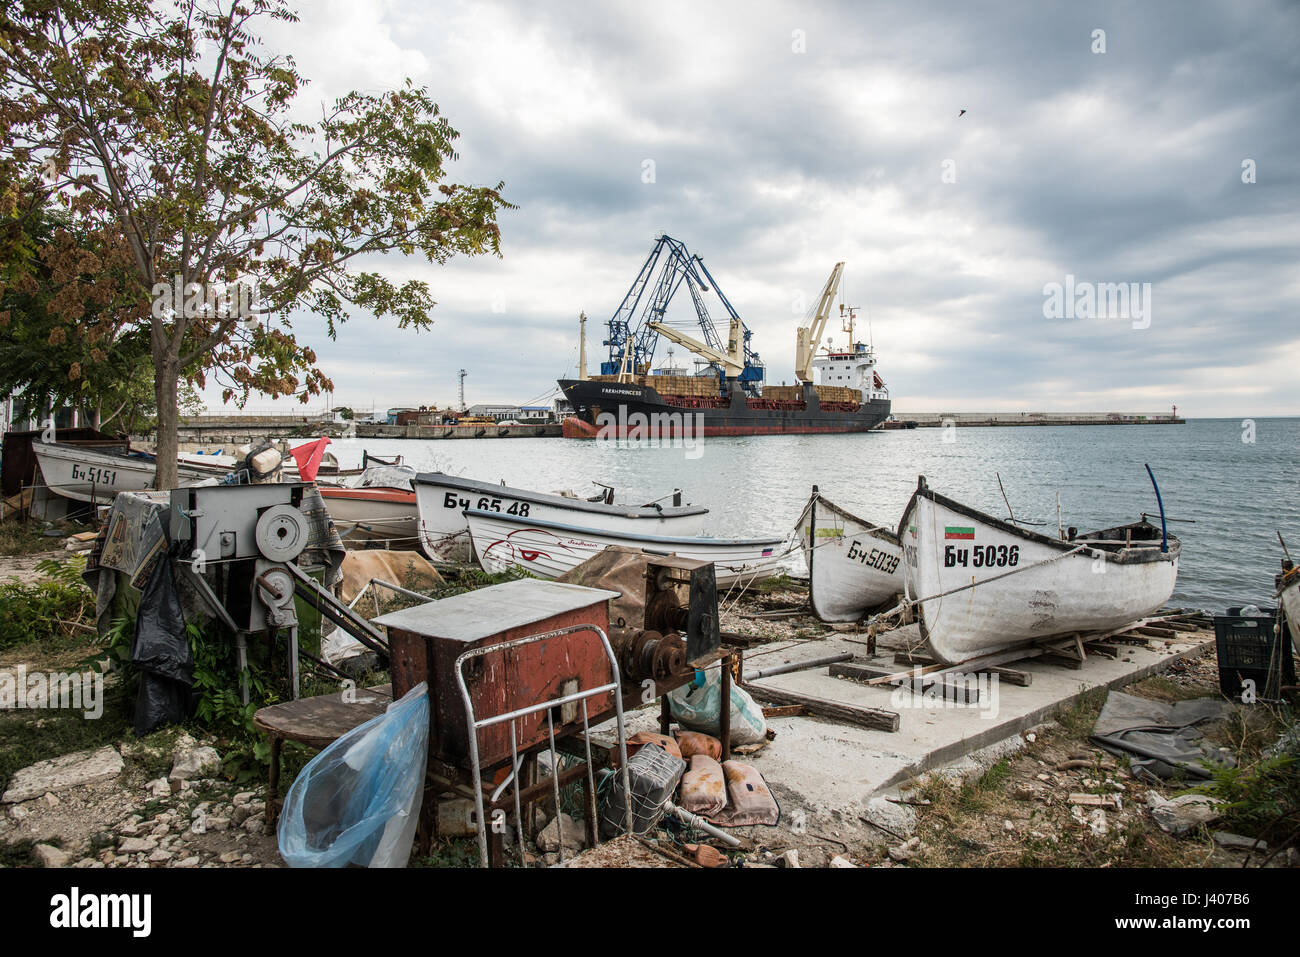 The Farah Princess cargo ship in port at Balchik, a Black Sea coastal town and seaside resort in the Southern Dobruja area of northeastern Bulgaria. T Stock Photo